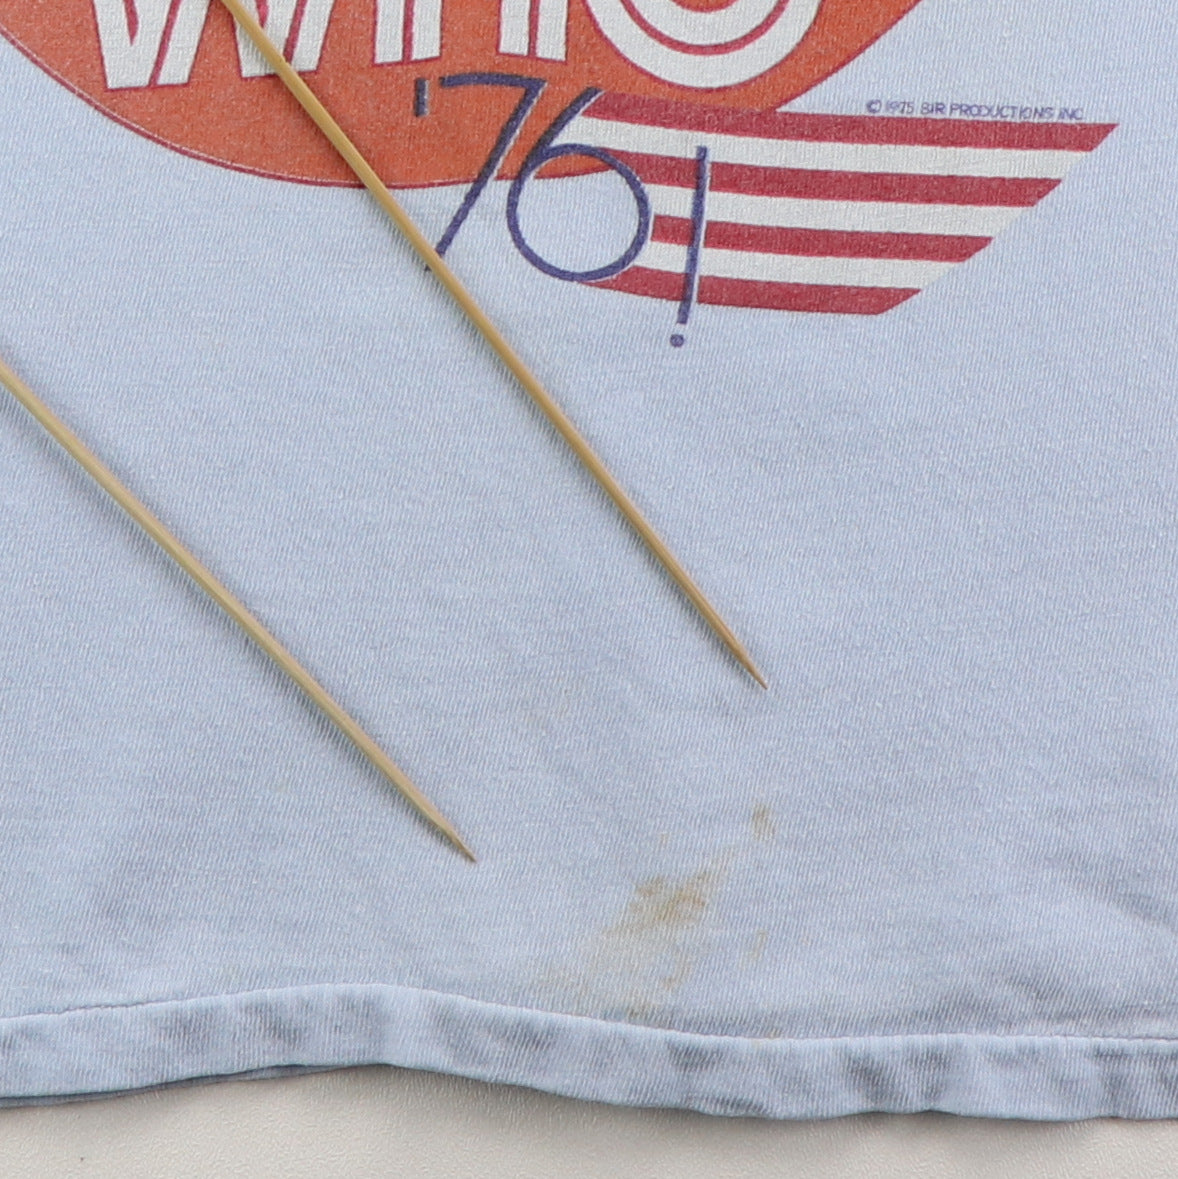 1976 The Who Shirt